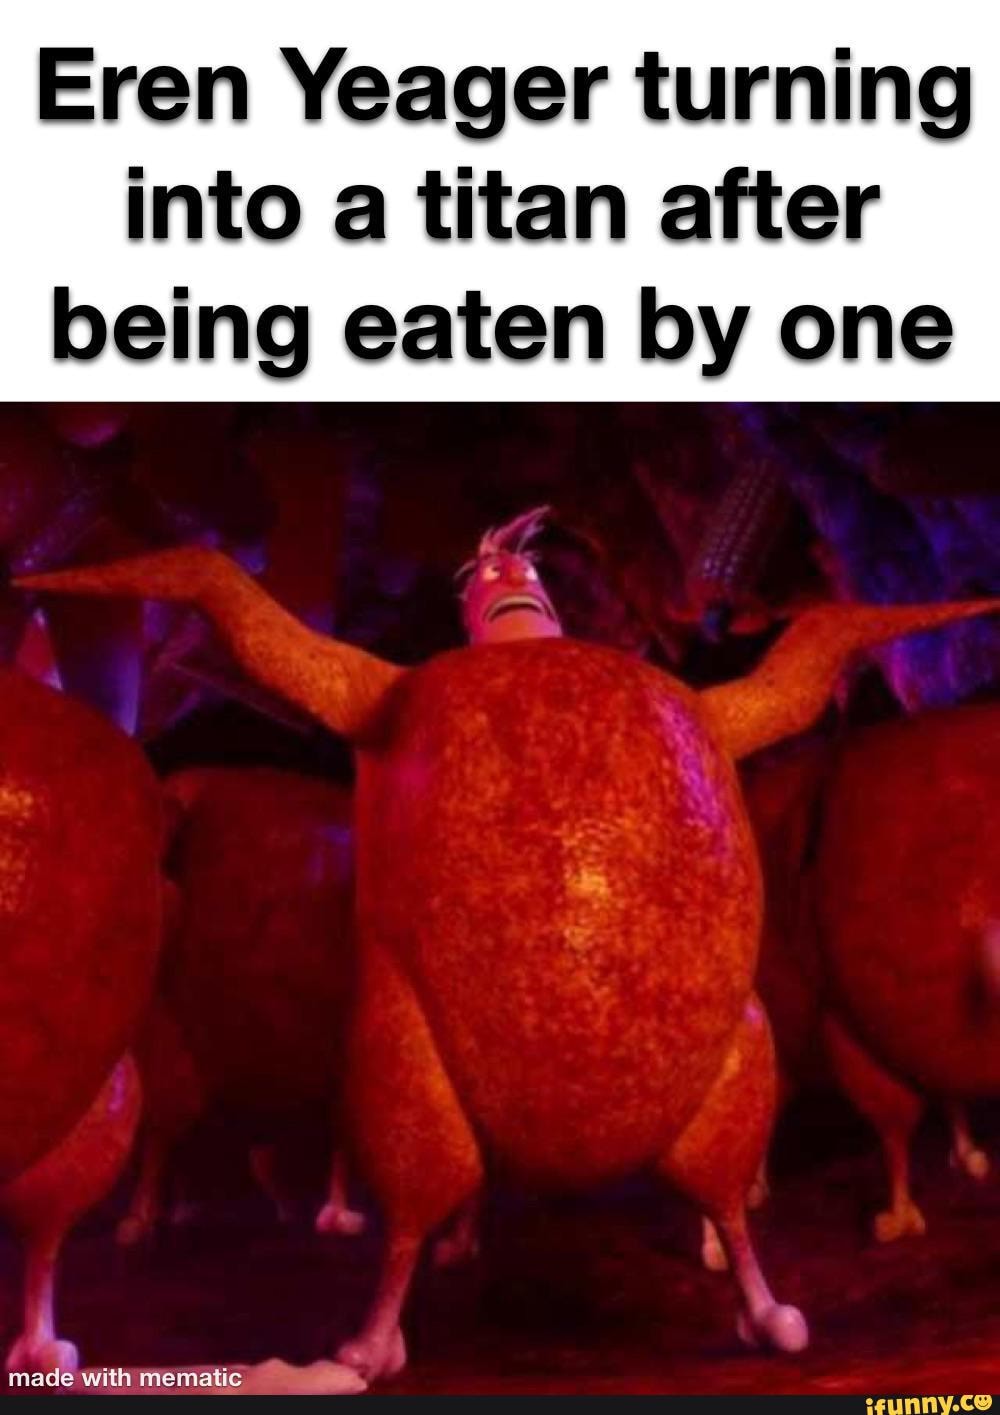 Eren Yeager turning into a titan after being eaten by one - iFunny